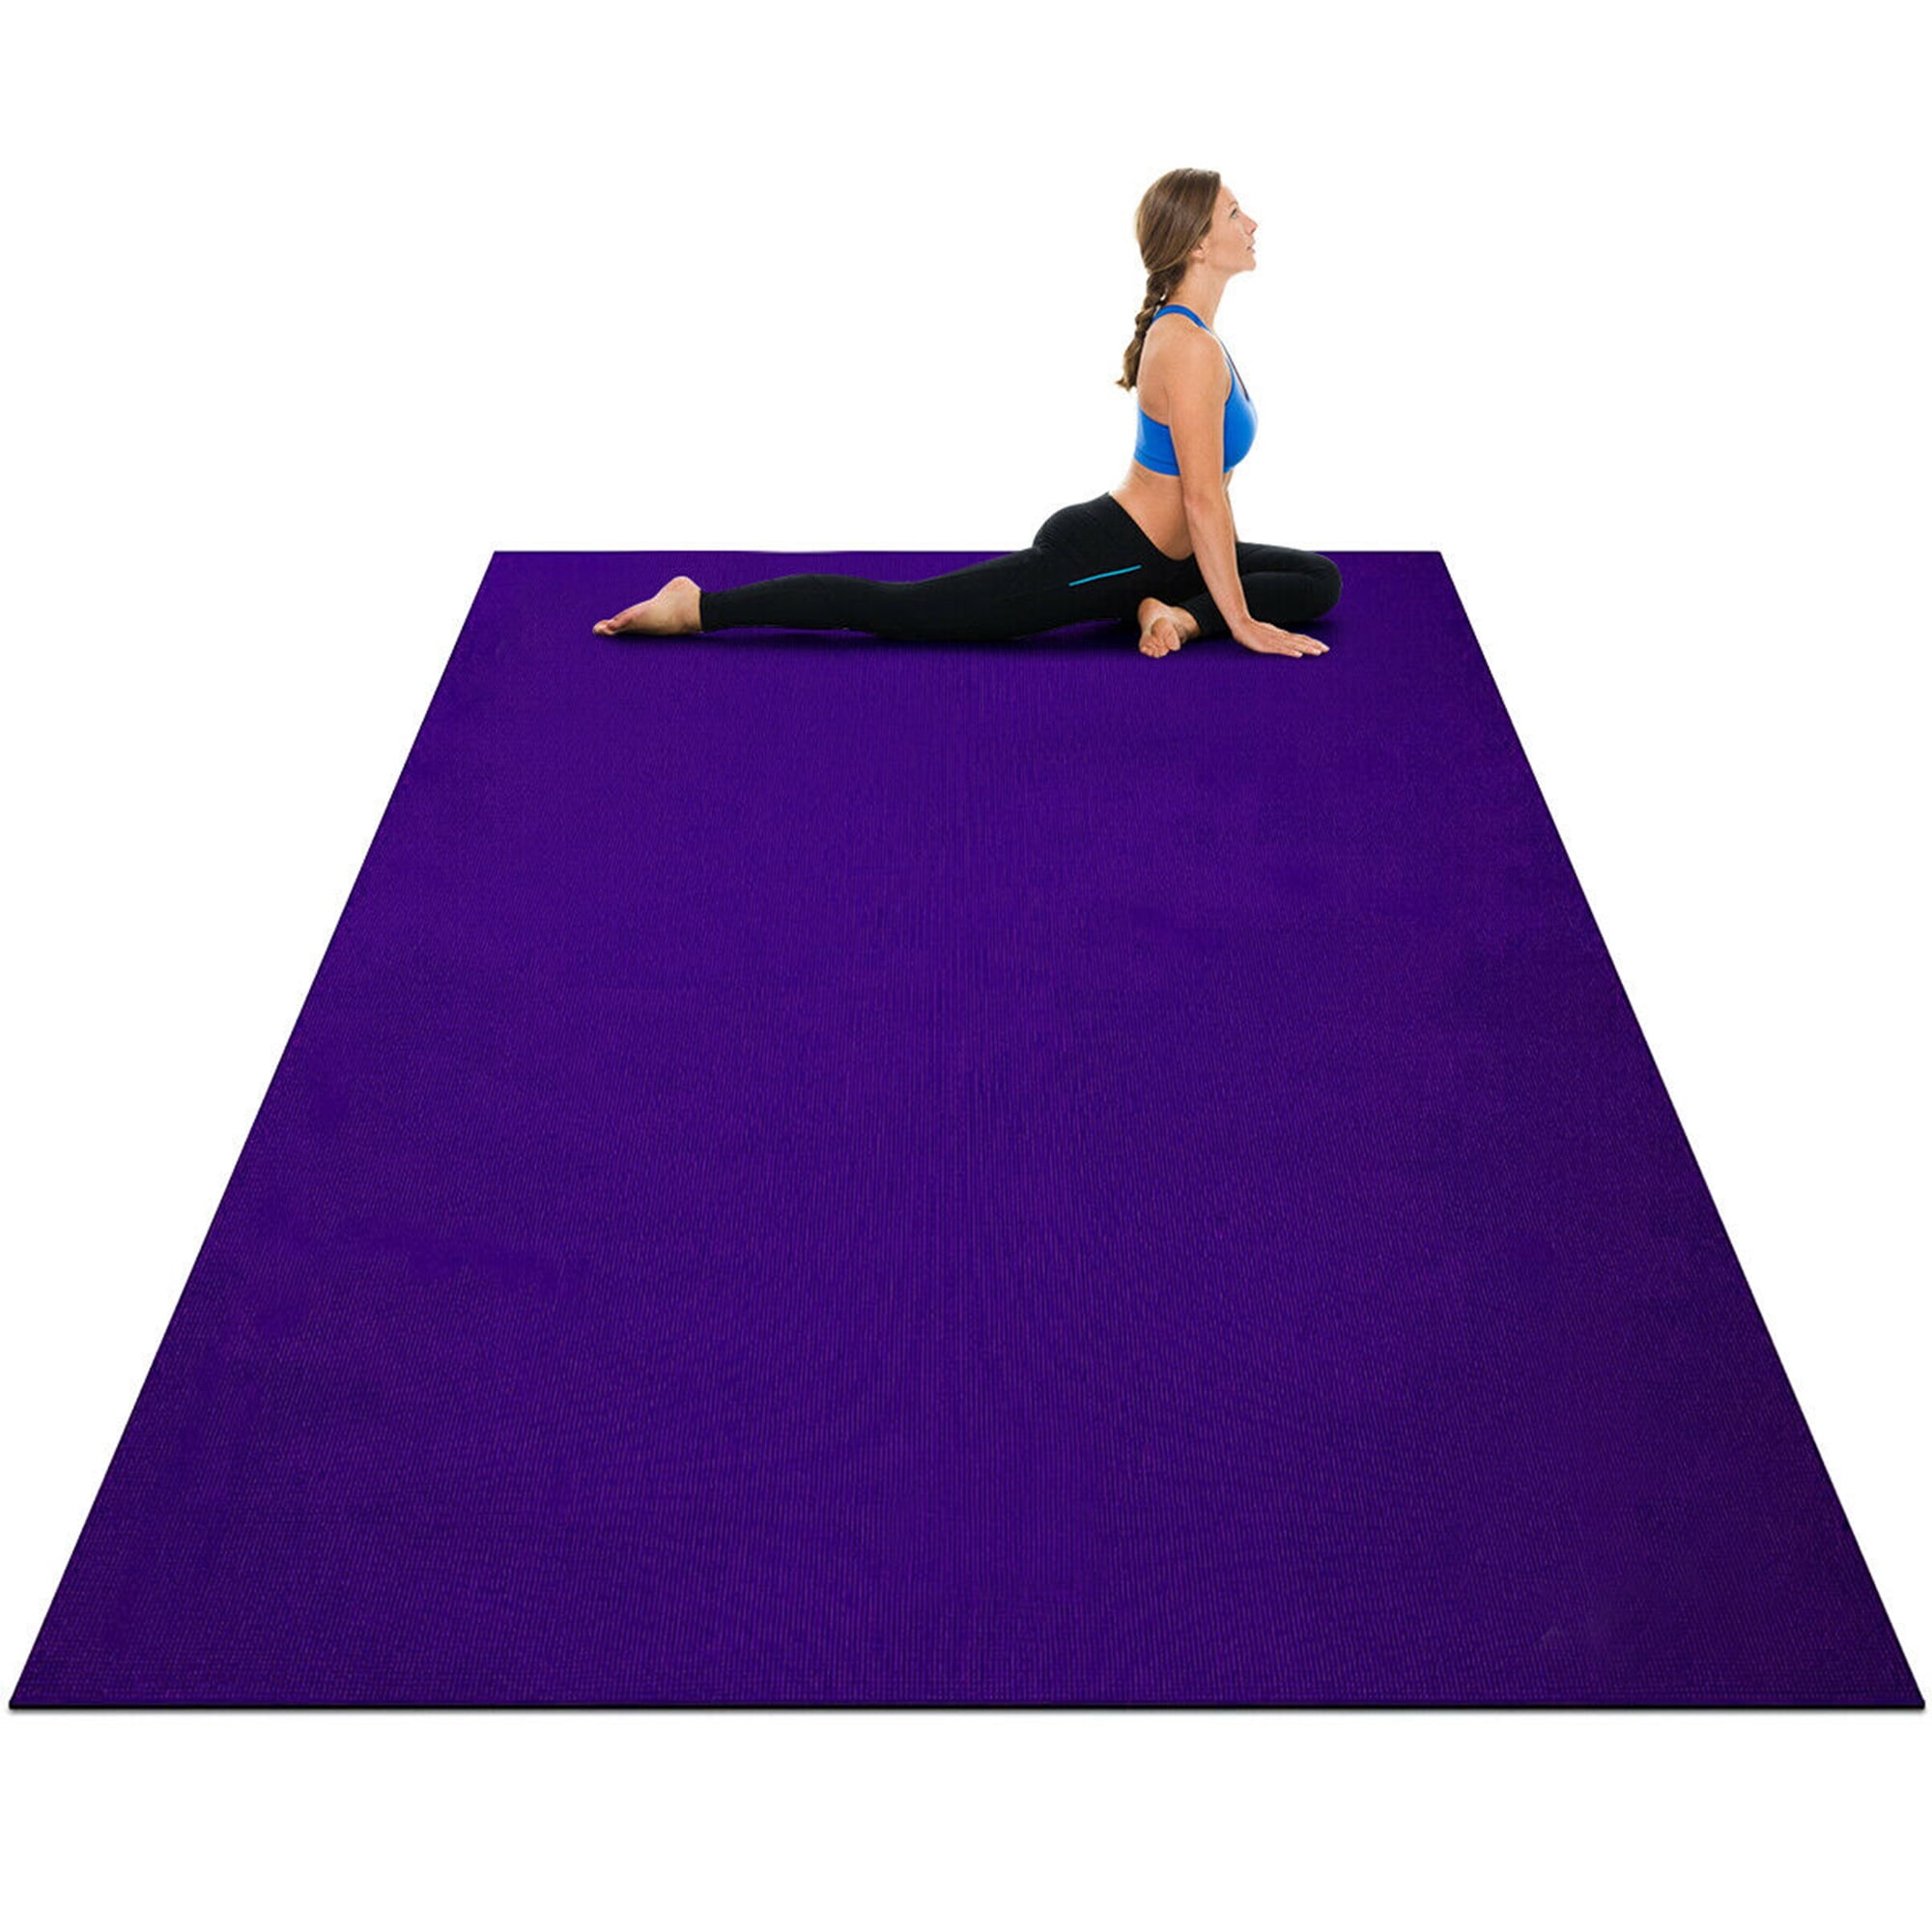 Premium Large Yoga Mat 9 x 6' x 8mm Extra Thick Wide Long Exercise Workout Floor 